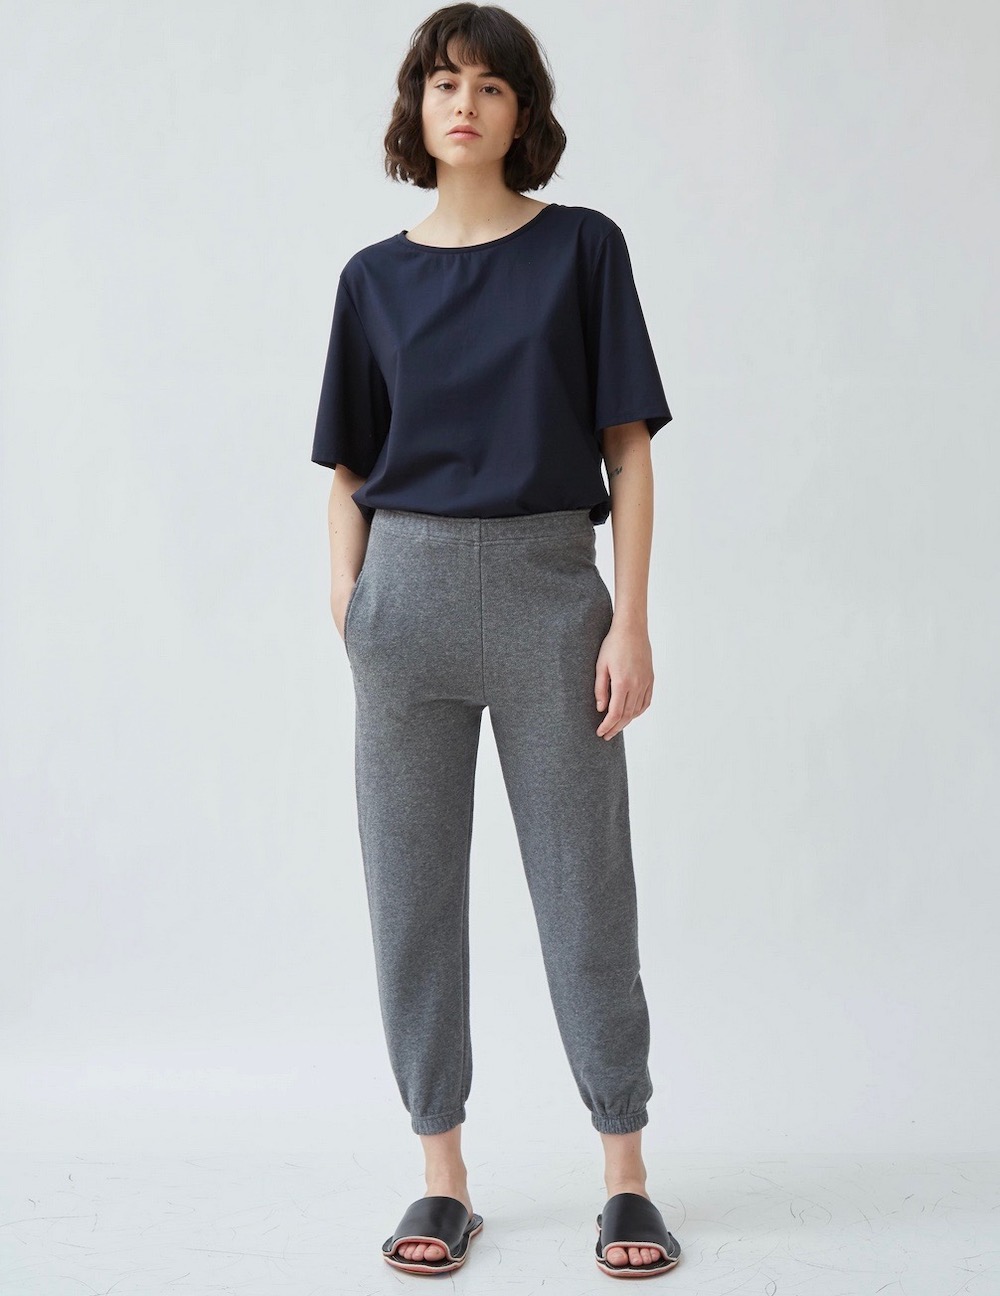 Best Sweatpants to Wear Outside Eventually - theFashionSpot